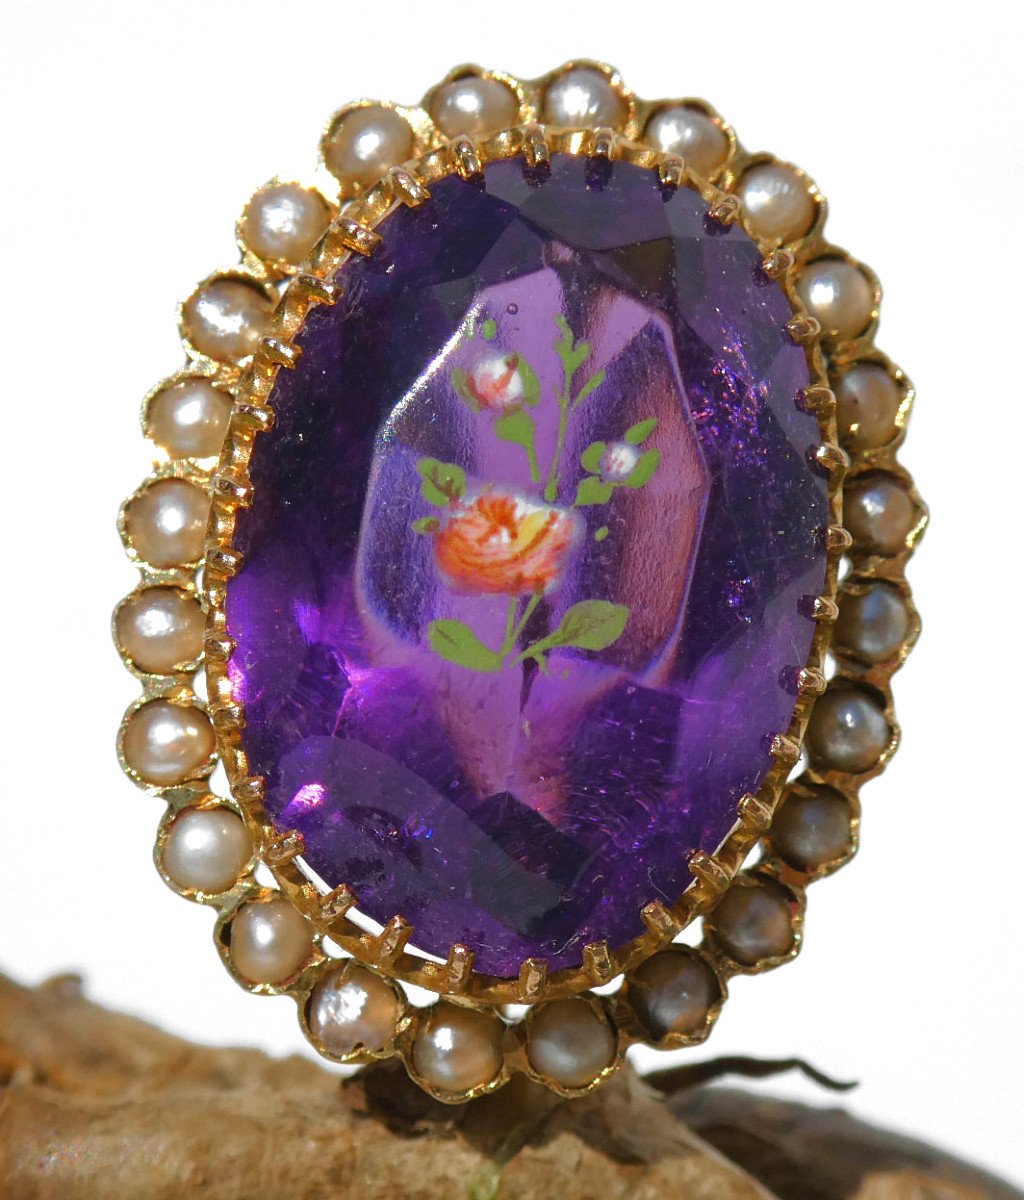 Louis Philippe Period Brooch, Gold, Pearls & Fixed Under Glass, Amethyst, 19th Century Jewel 1830-photo-2